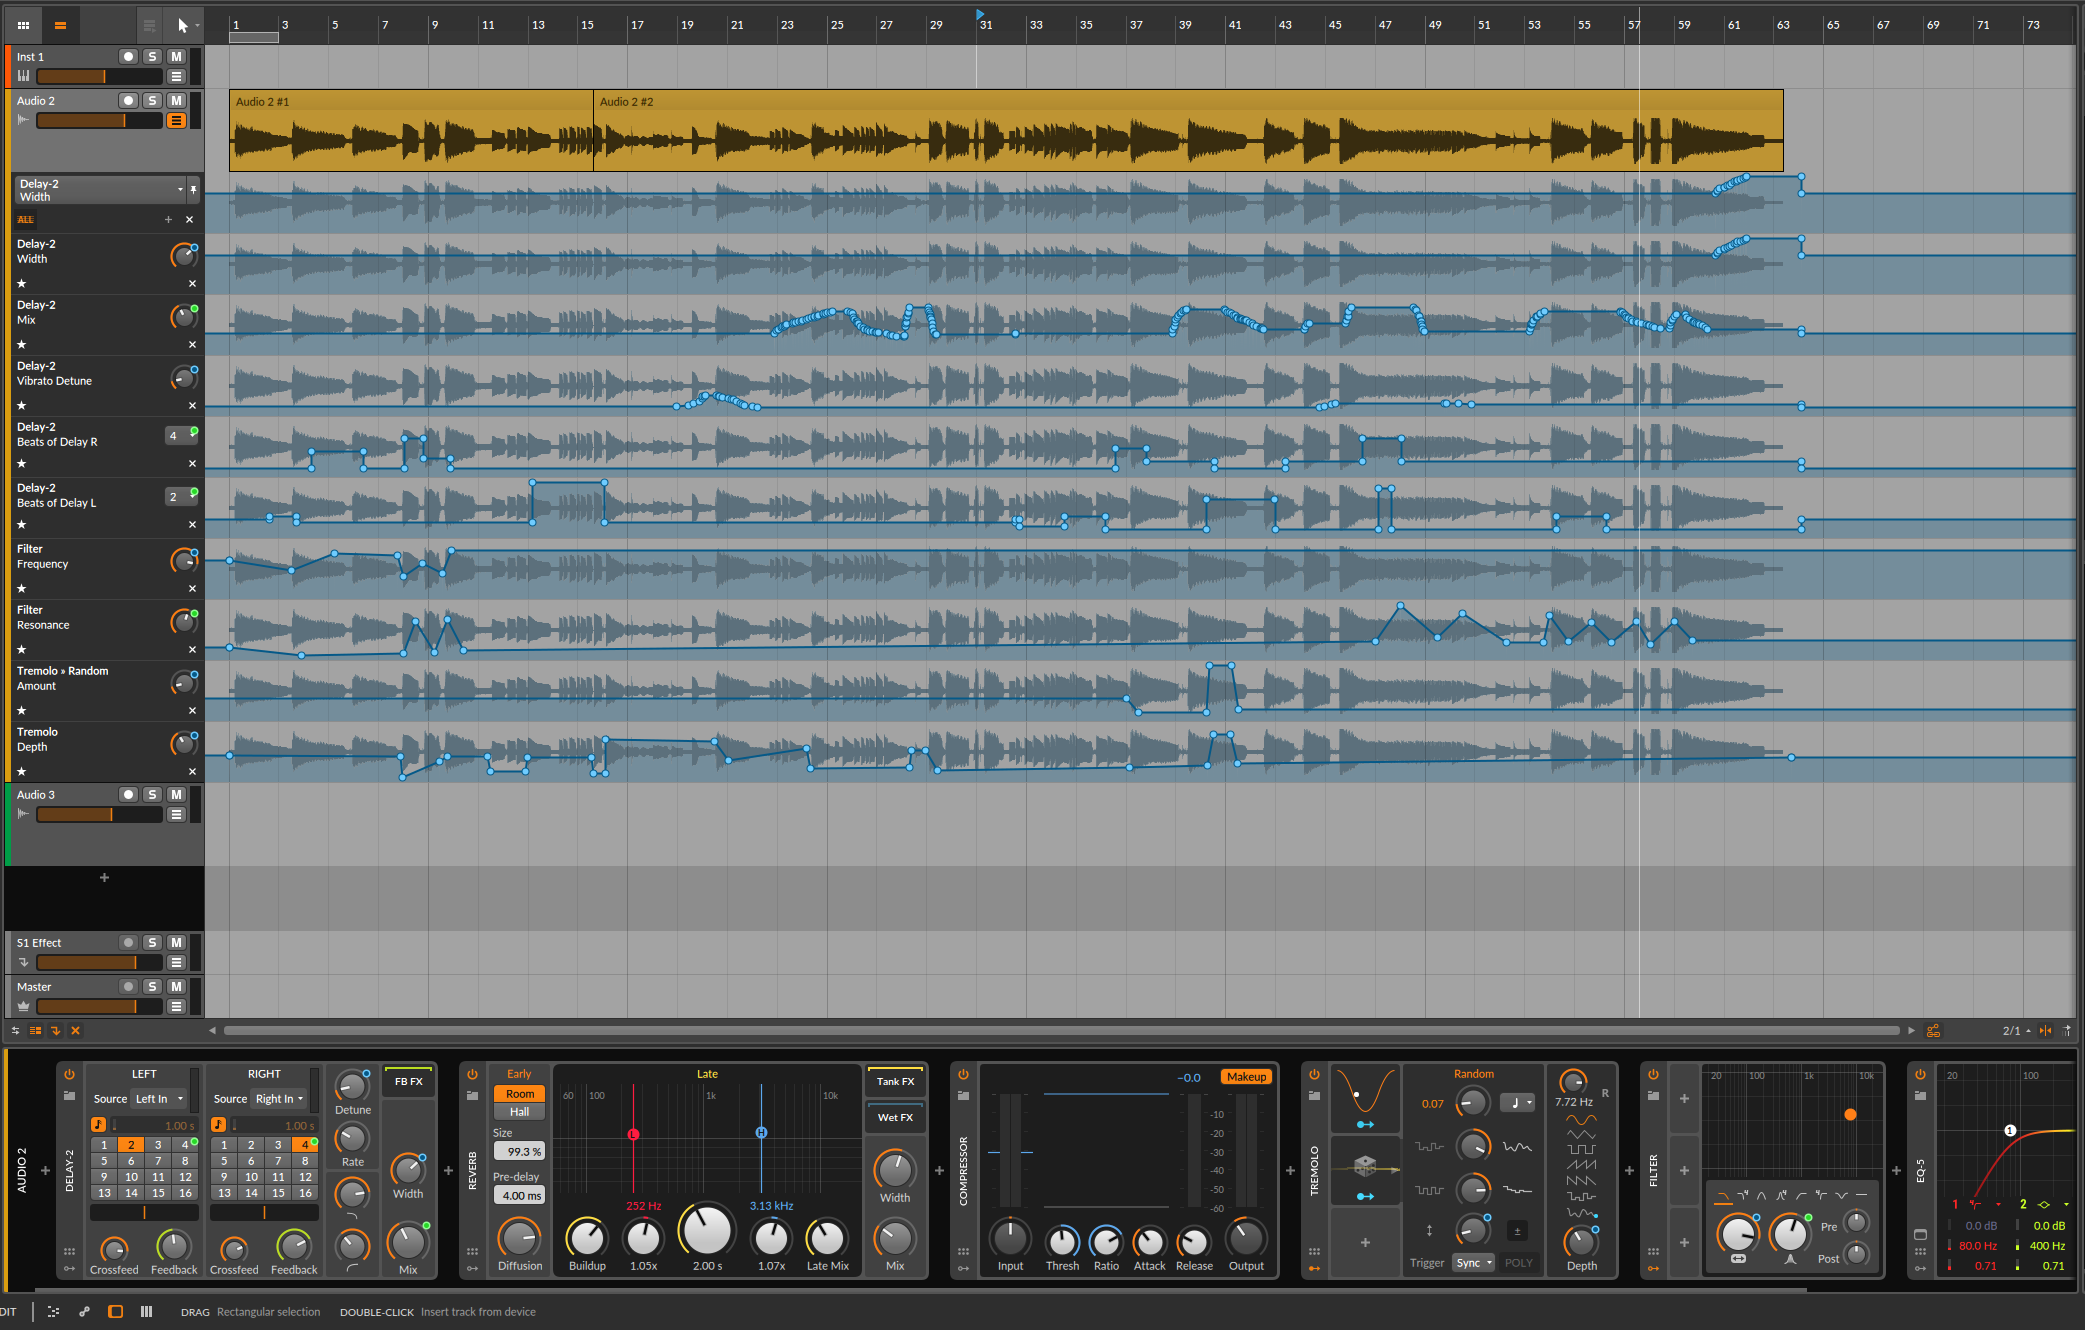 A screenshot of my DAW with an audio recording at the top, several layers of effects automations, and an effects chain at the bottom